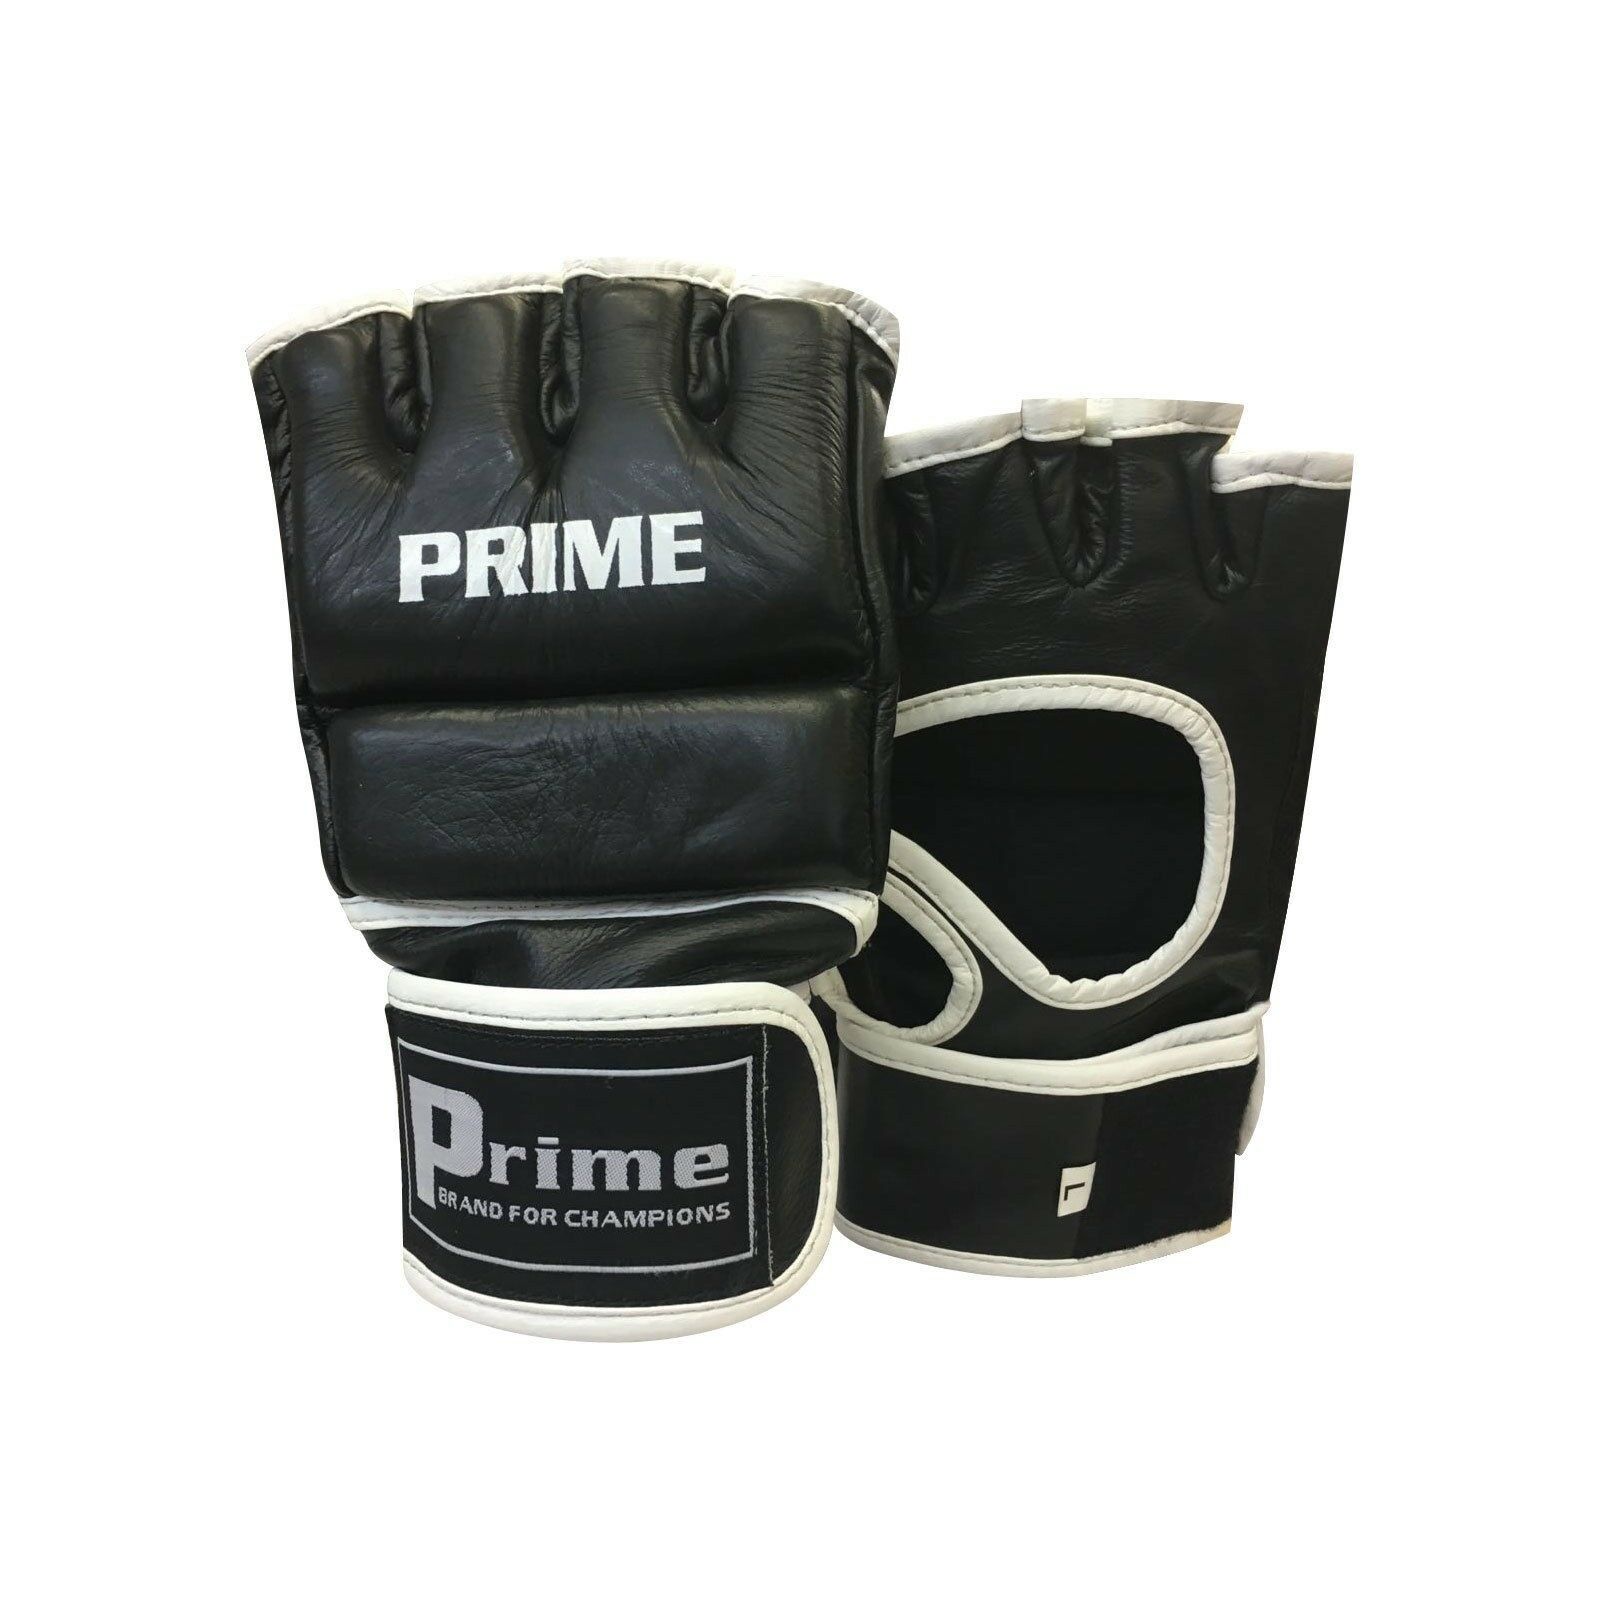 Prime Mma Ufc Grappling Gloves Cage Fight Kick Boxing Muay Thai Punch Bag Black2